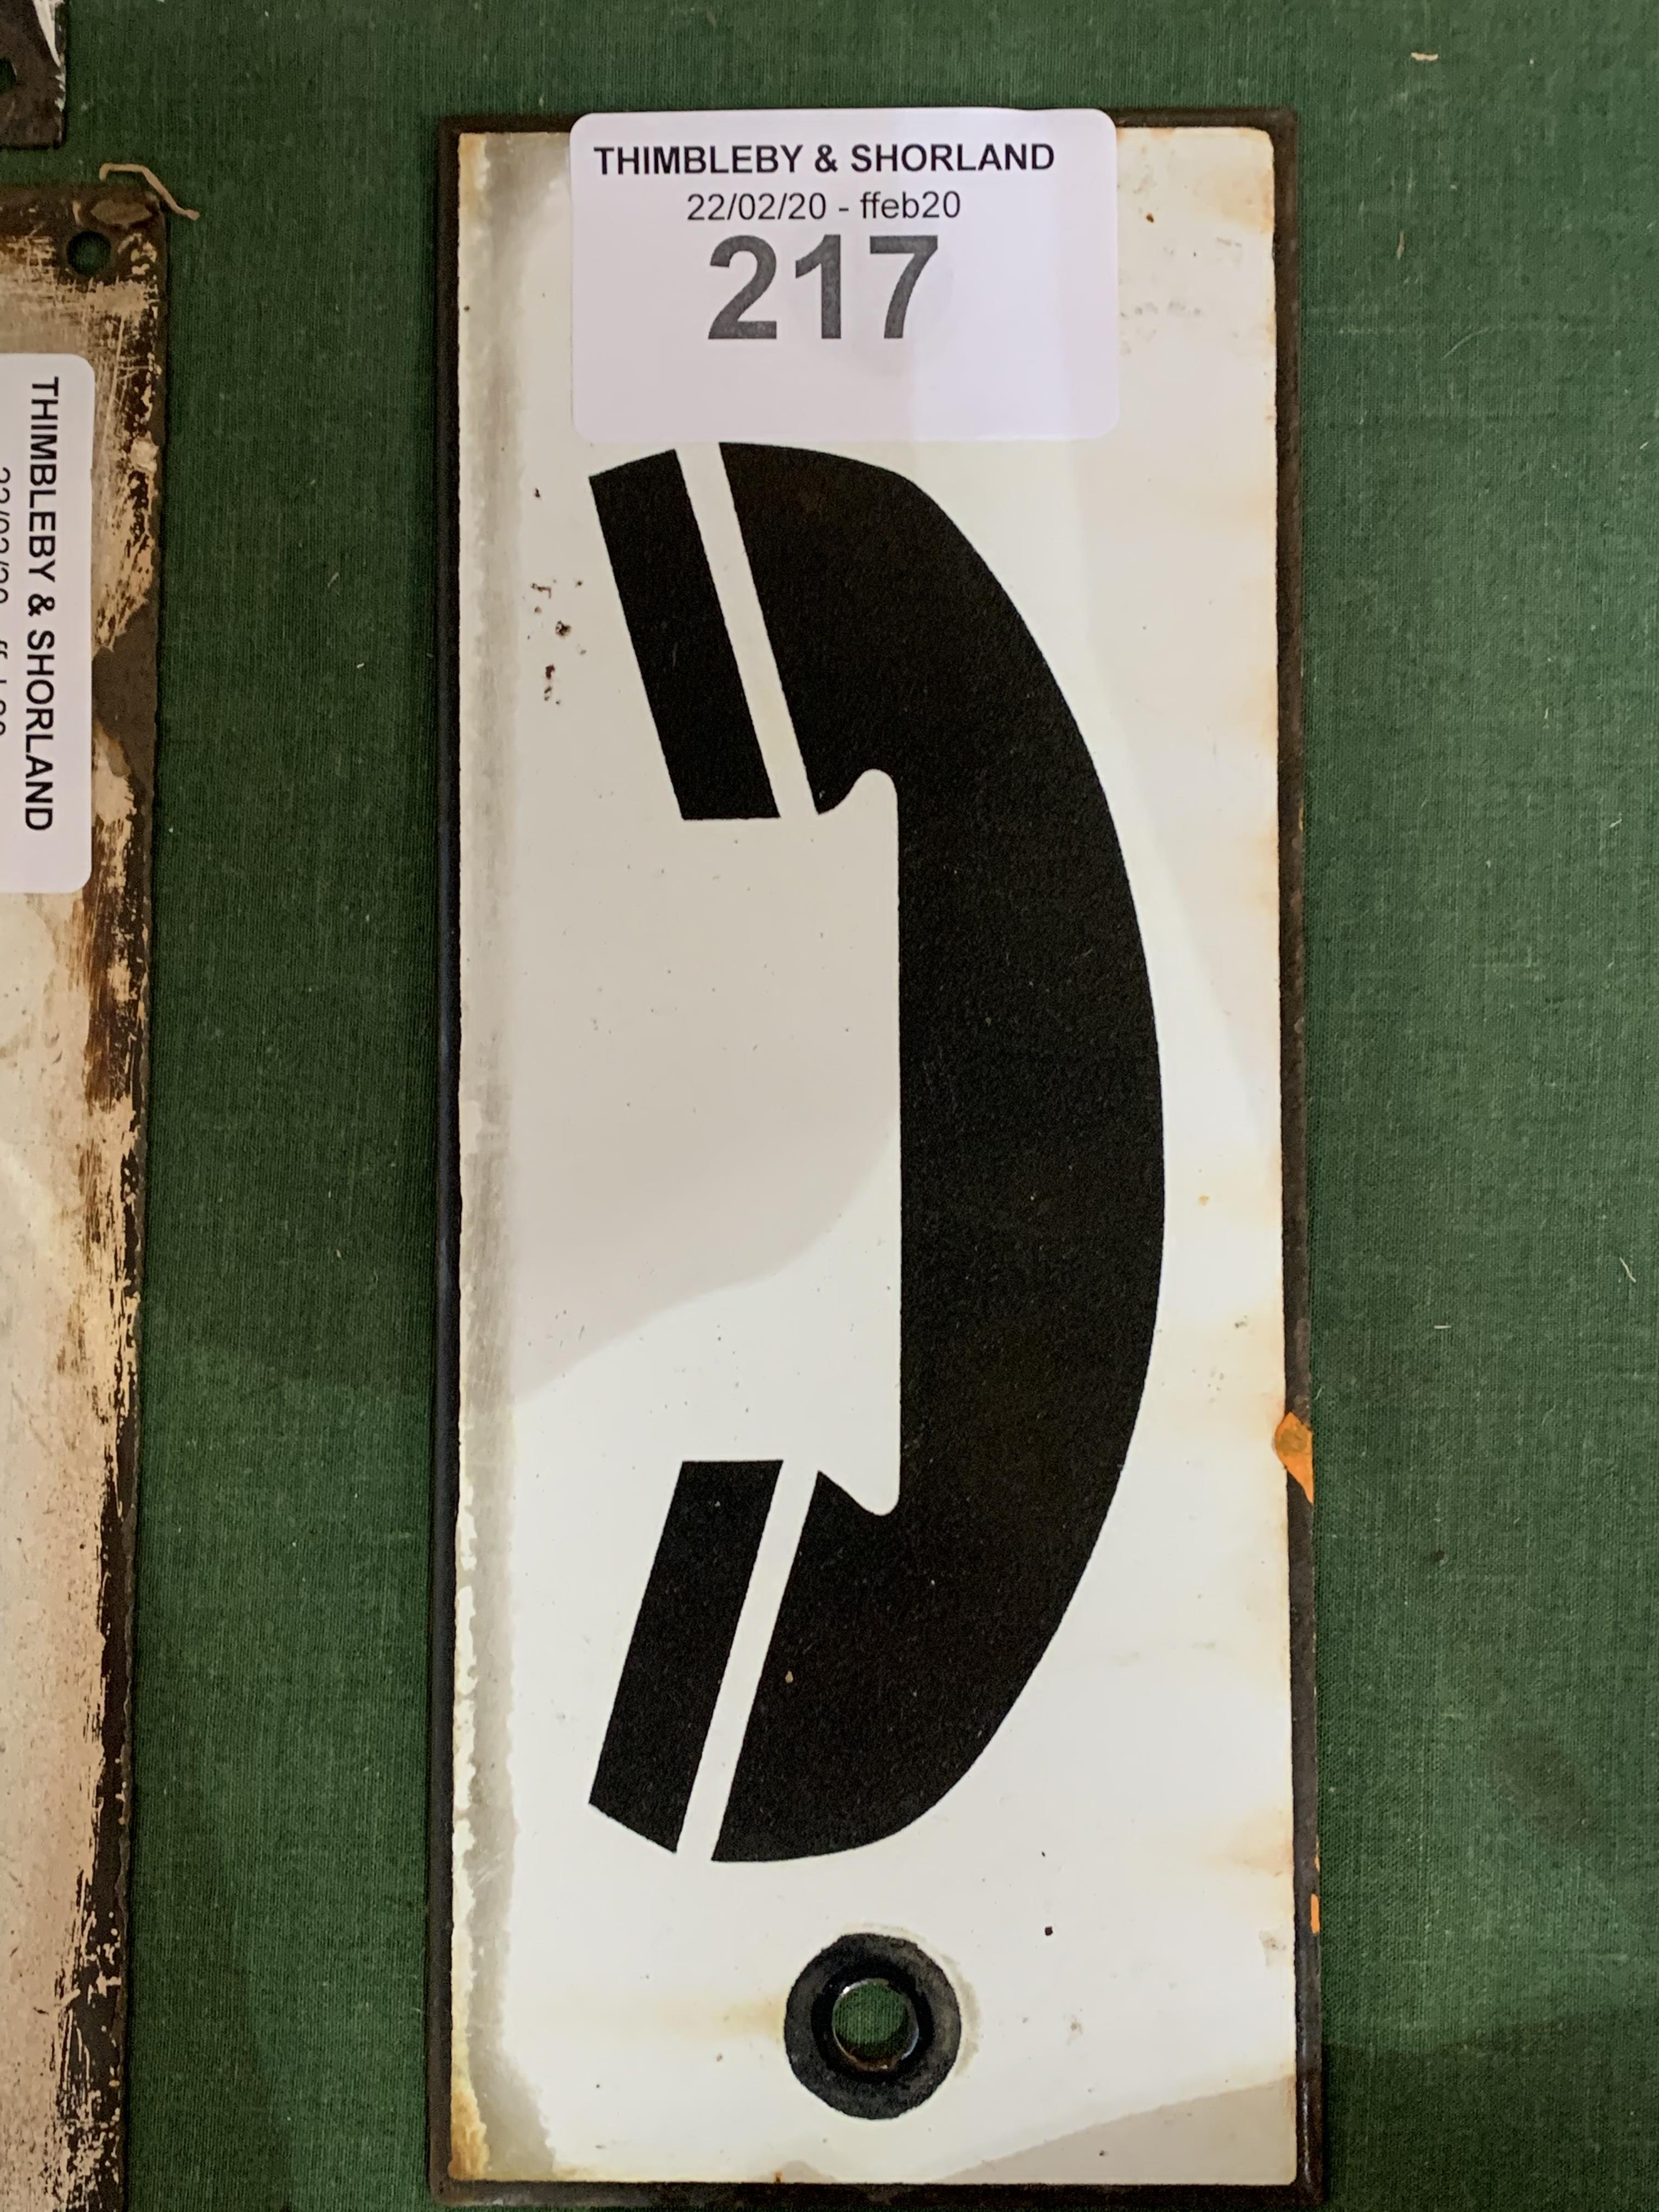 French / continental enamel sign, Telephone logo. Very good condition. Estimate £30-50.